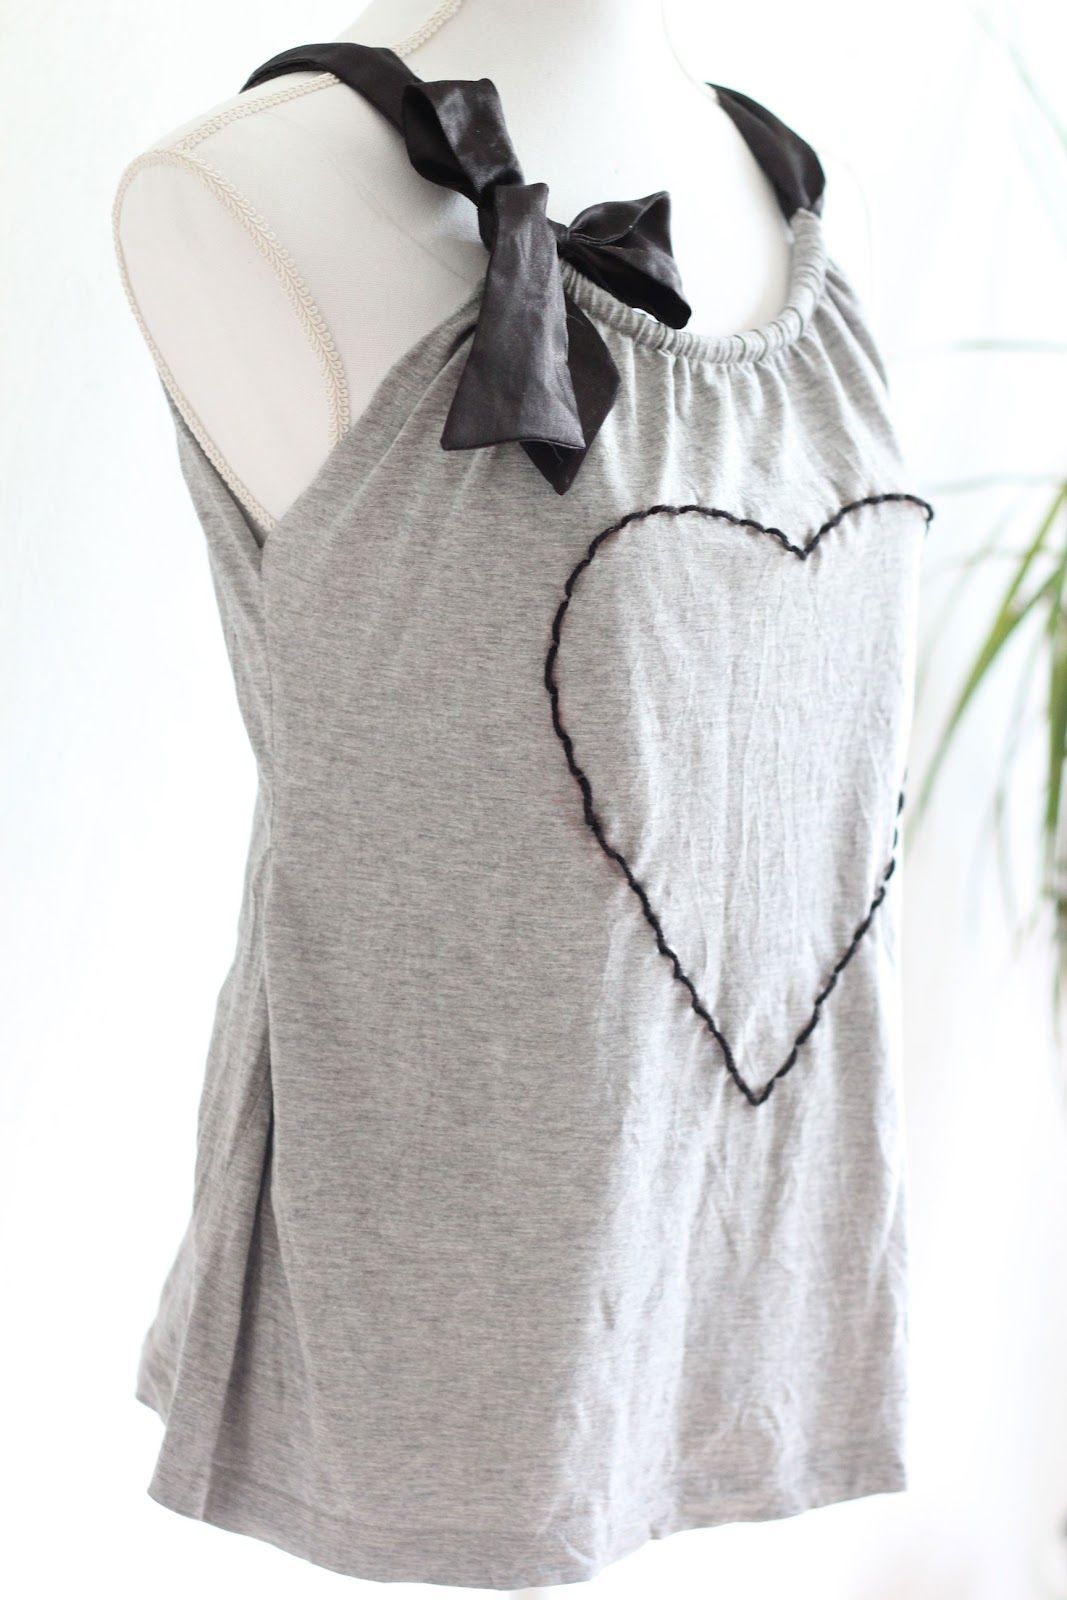 Upcycle tshirt into ribbon tank top- would look really cute with a fancy pink ri